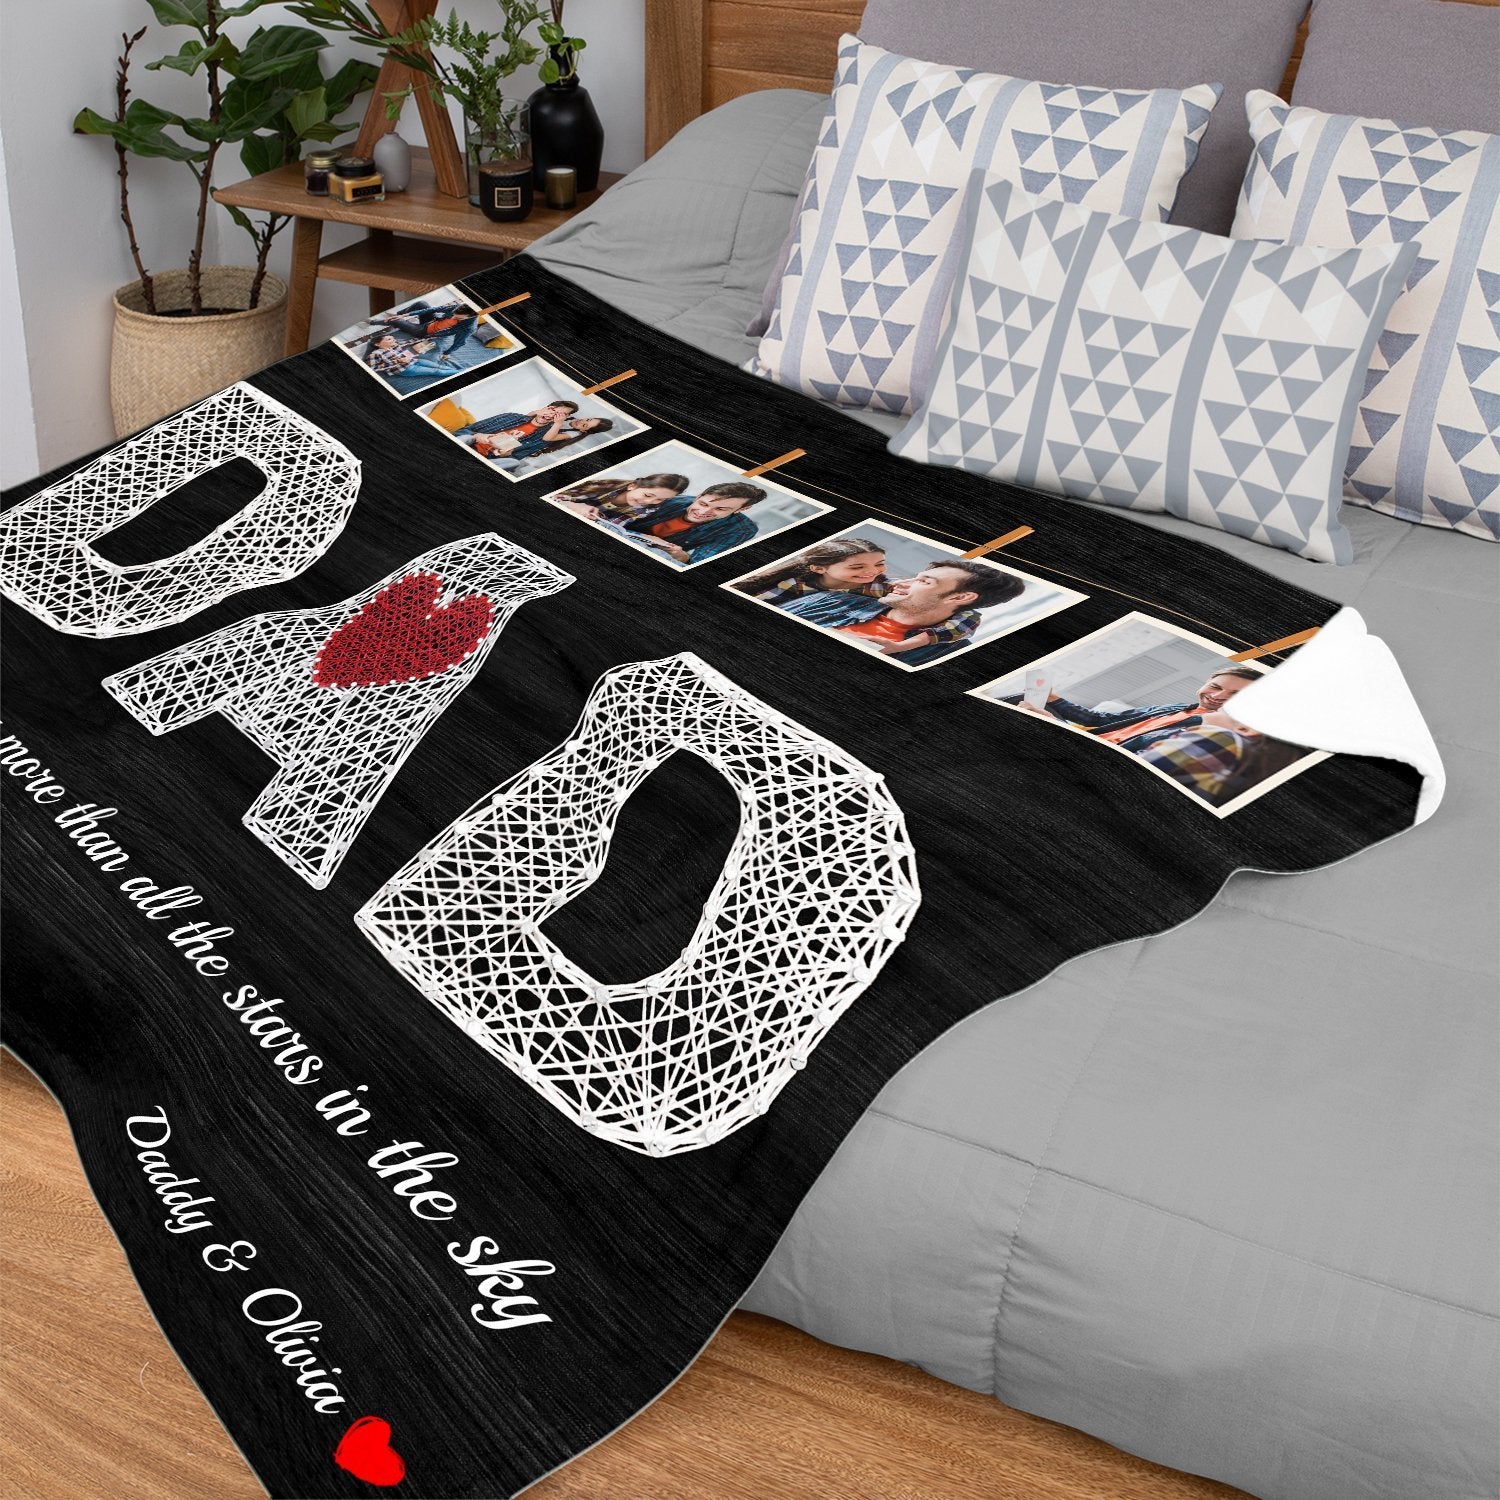 Dad, Custom Photo, 5 Pictures Personalized Name And Text Blanket